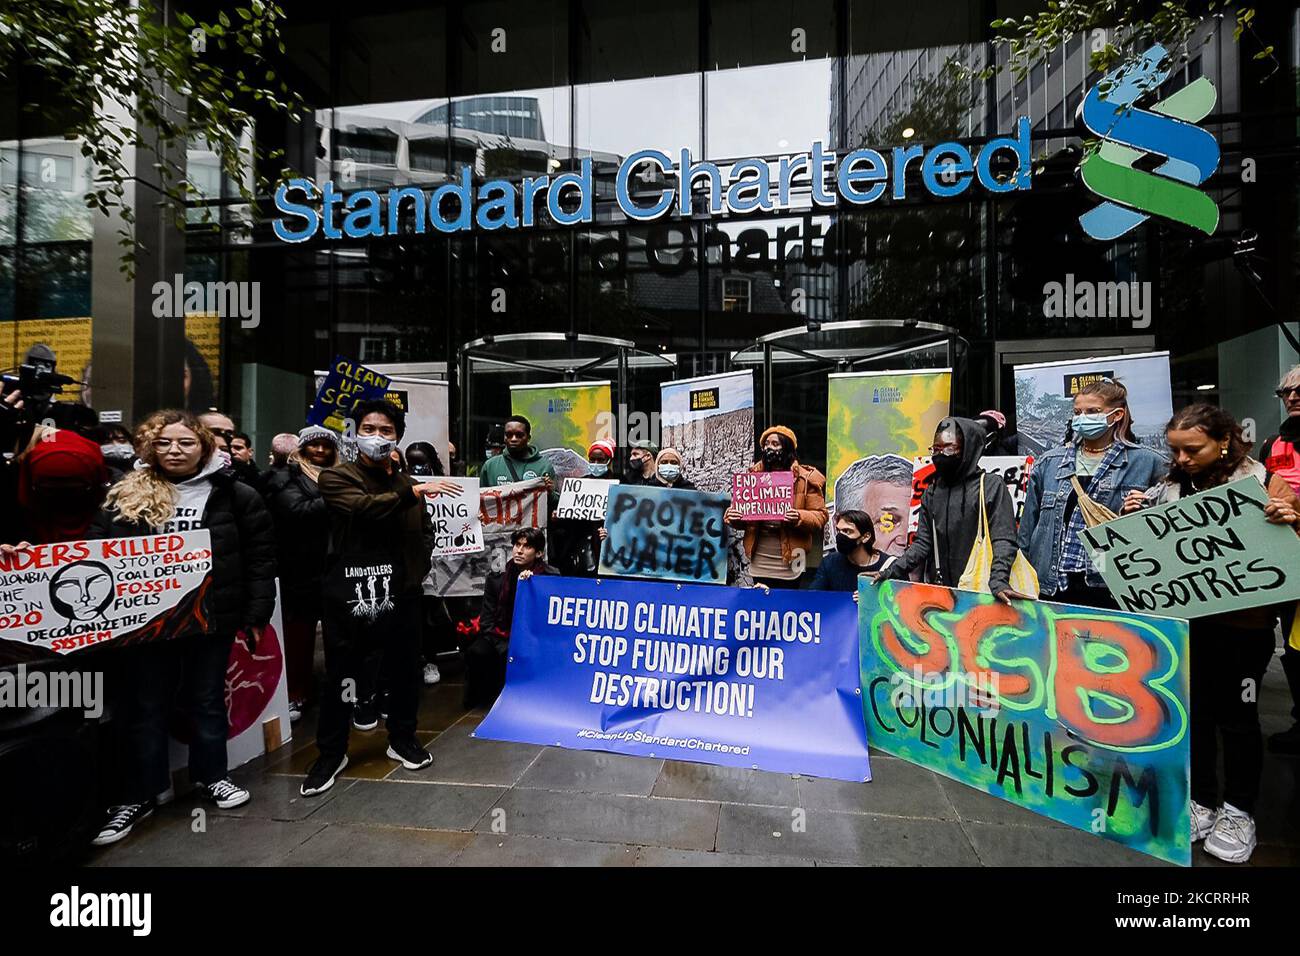 Climate activists protest outside the headquarters of Standard Chartered in London, Britain, 29 October 2021. Climate protesters across the world are demanding that the global financial system stops its financing of fossil fuel companies. According to a report by a coalition of NGOs, the world's biggest banks have paid $3.8 trillion into fossil fuel companies since the 2015 Paris climate agreement. (Photo by Maciek Musialek/NurPhoto) Stock Photo